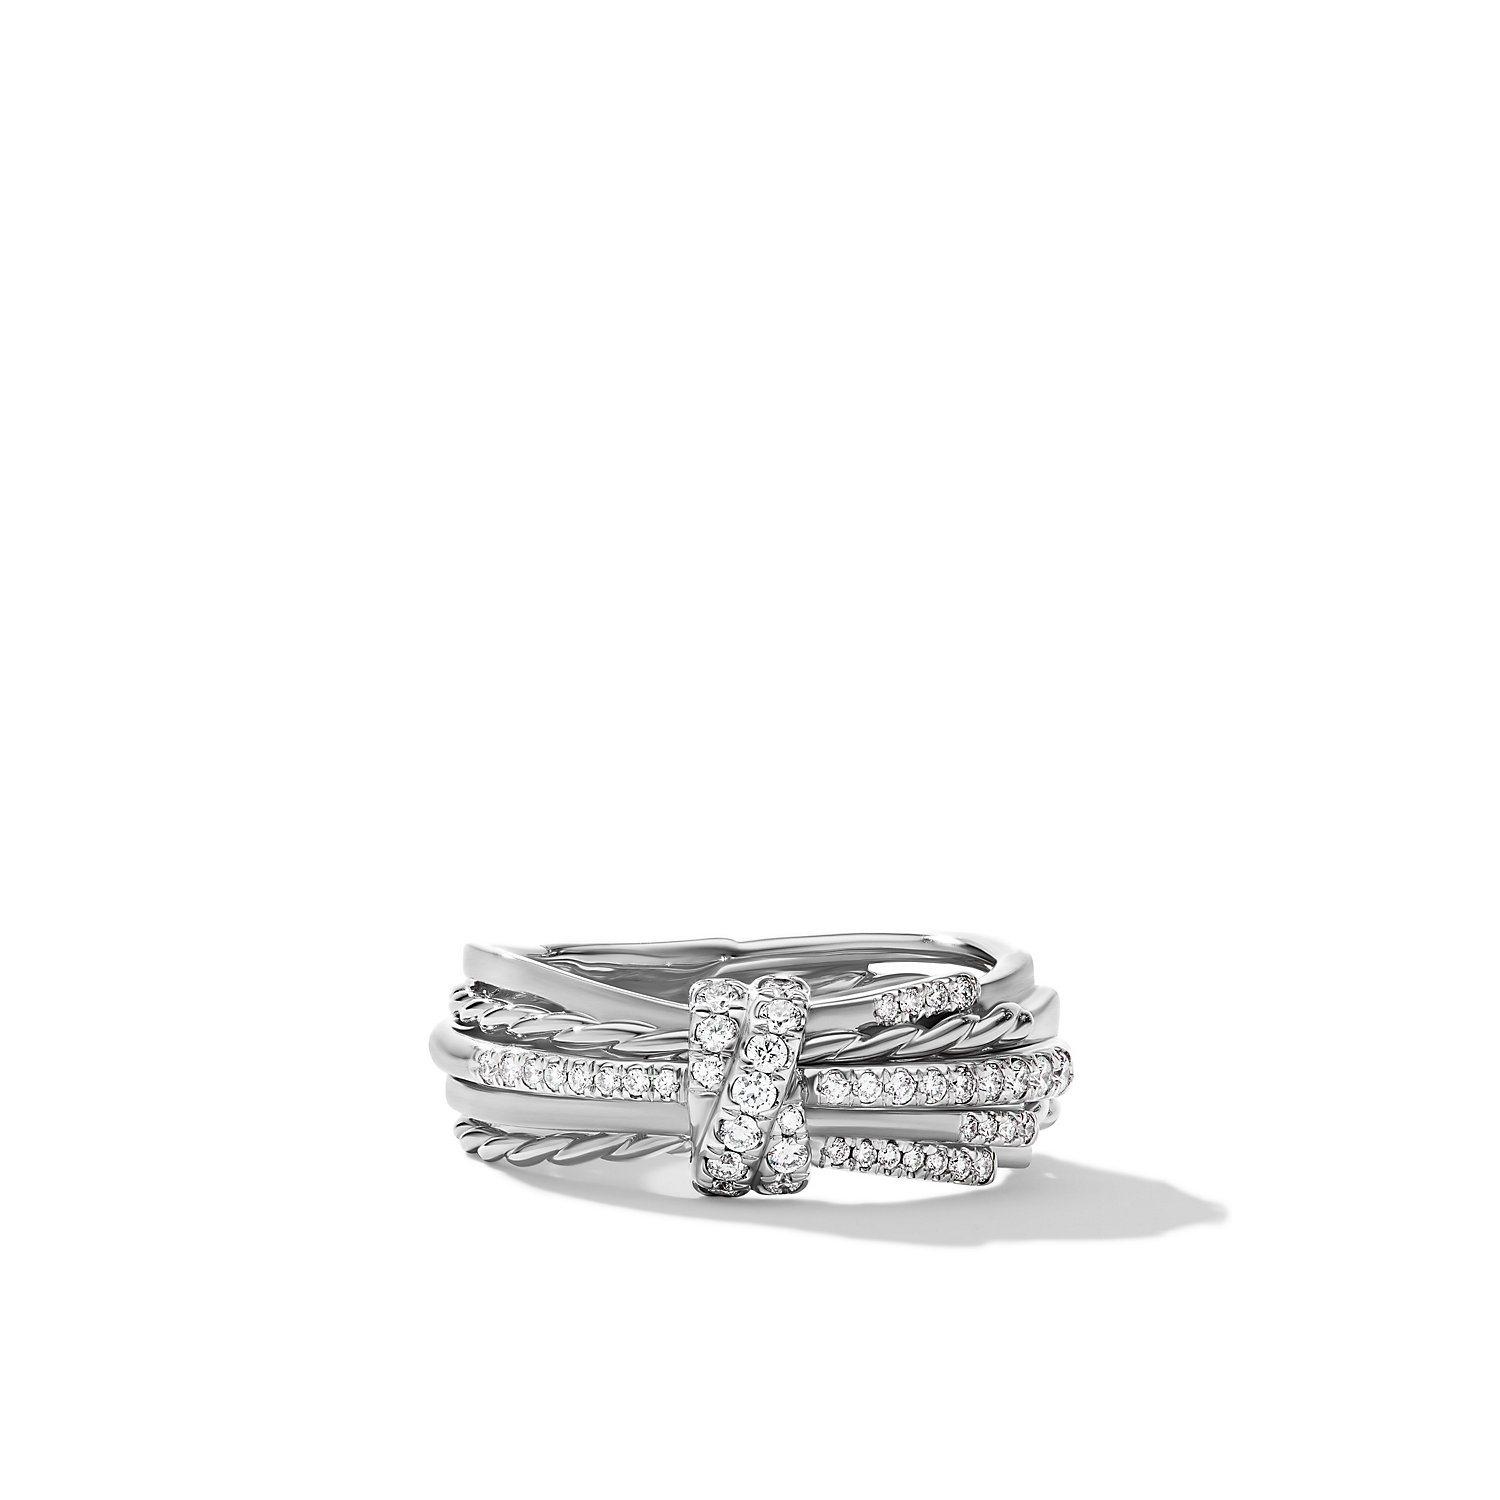 David Yurman Angelika Ring in Sterling Silver with Pave Diamonds, size 7